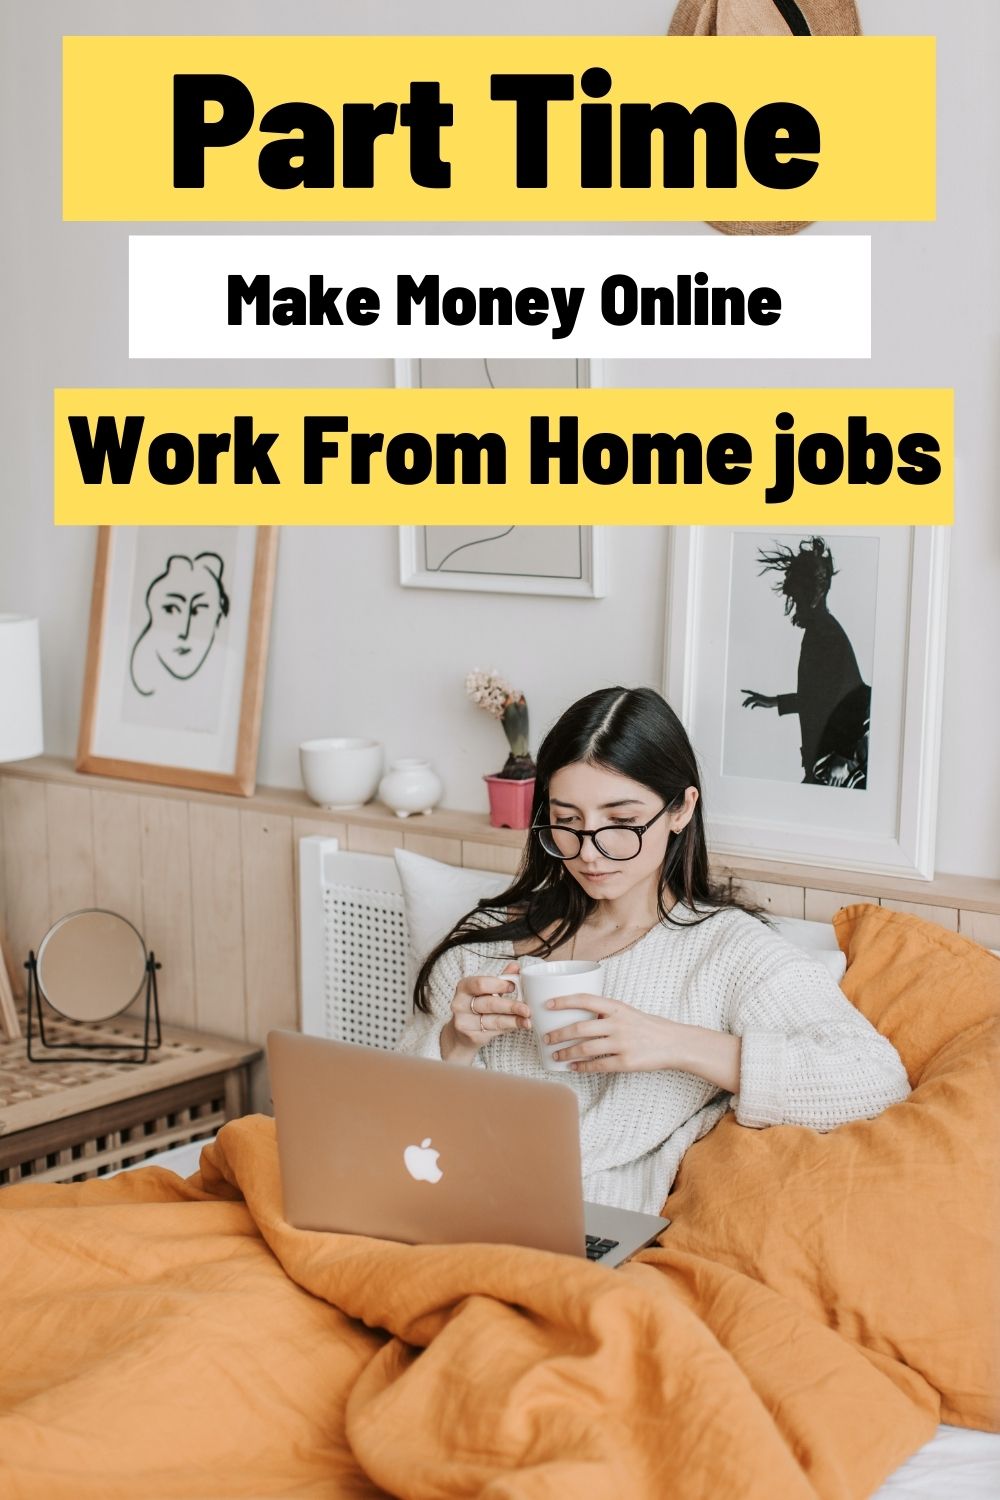 17 Part Time Work From Home jobs